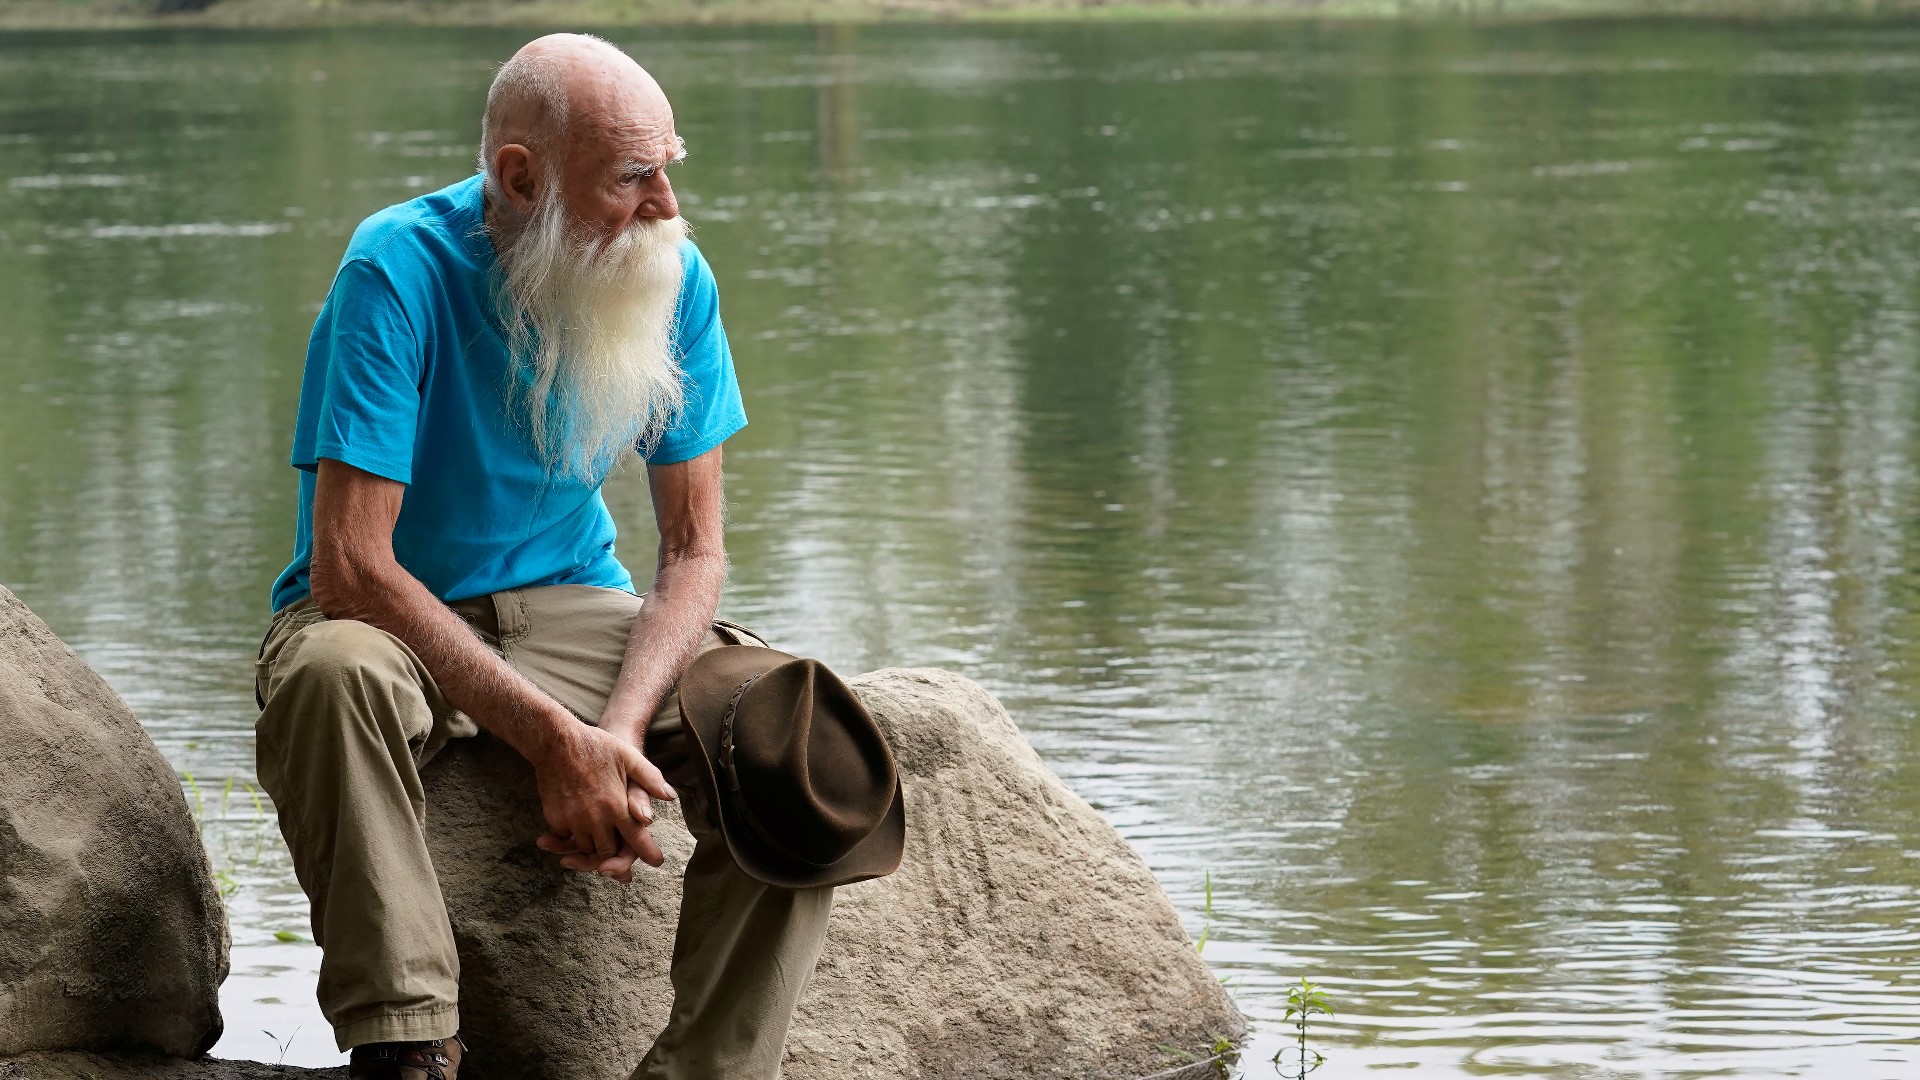 An off-the-grid New Hampshire hermit known as “River Dave” says he doesn’t think he can return to his lifestyle.